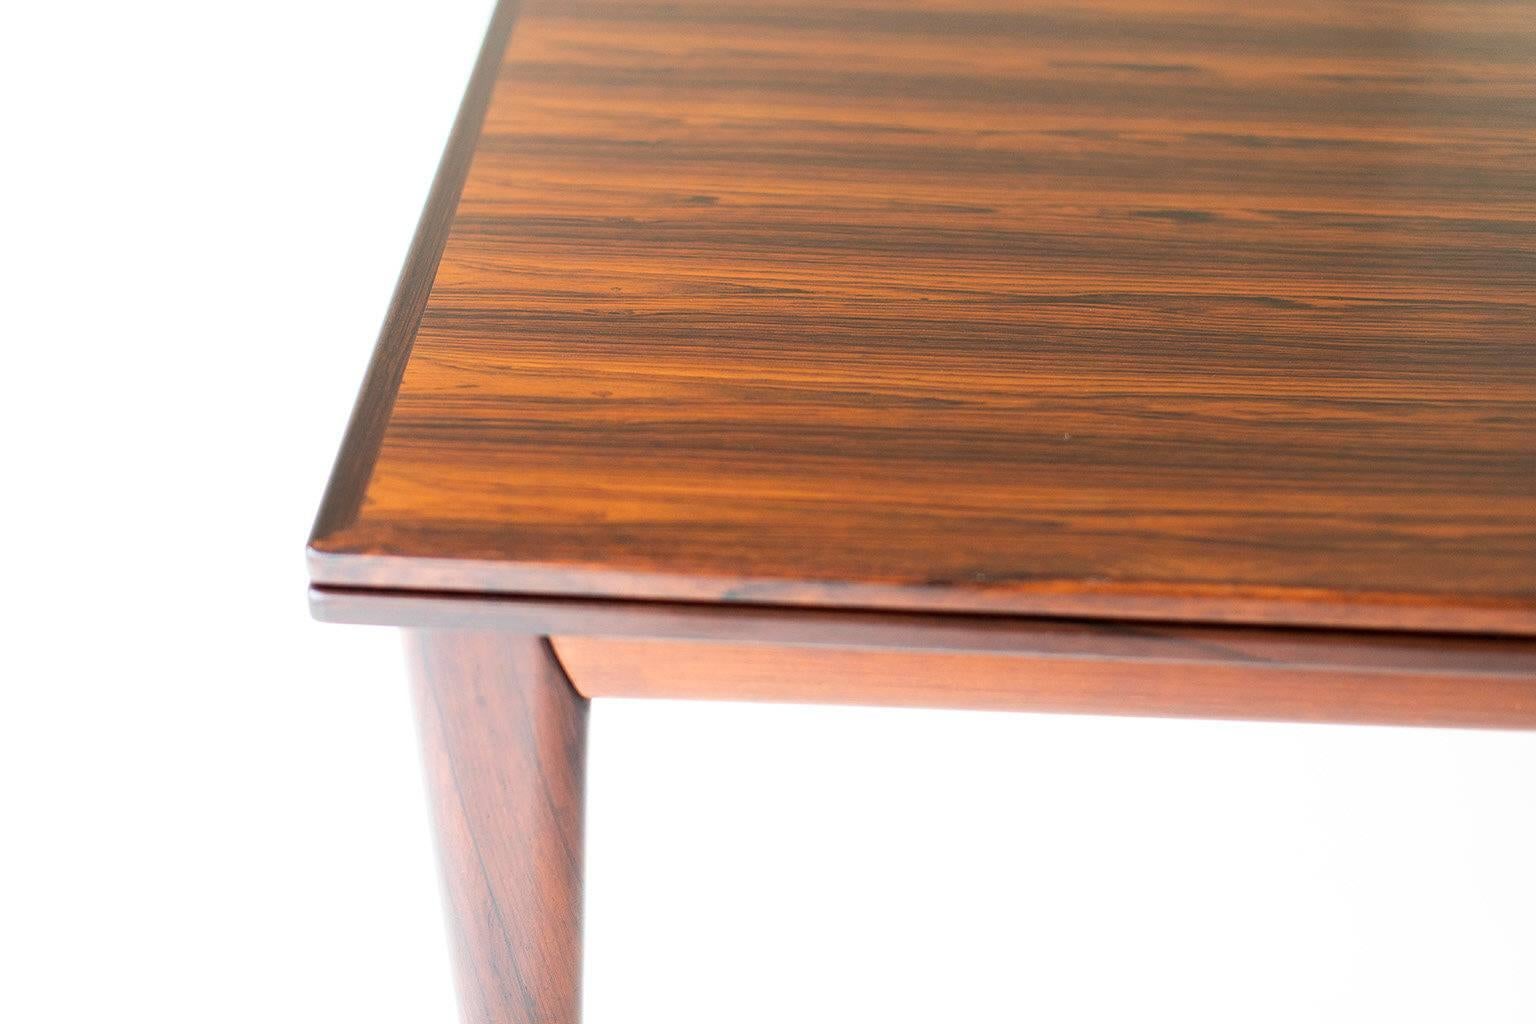 Designer: Niels Otto Moller.

Manufacturer: J.L. Moller.
Period/model: Mid-Century Modern.
Specs: Rosewood, rosewood veneer.

Condition:

This Niels O Moller rosewood dining table is in vintage condition. The original finish still show well